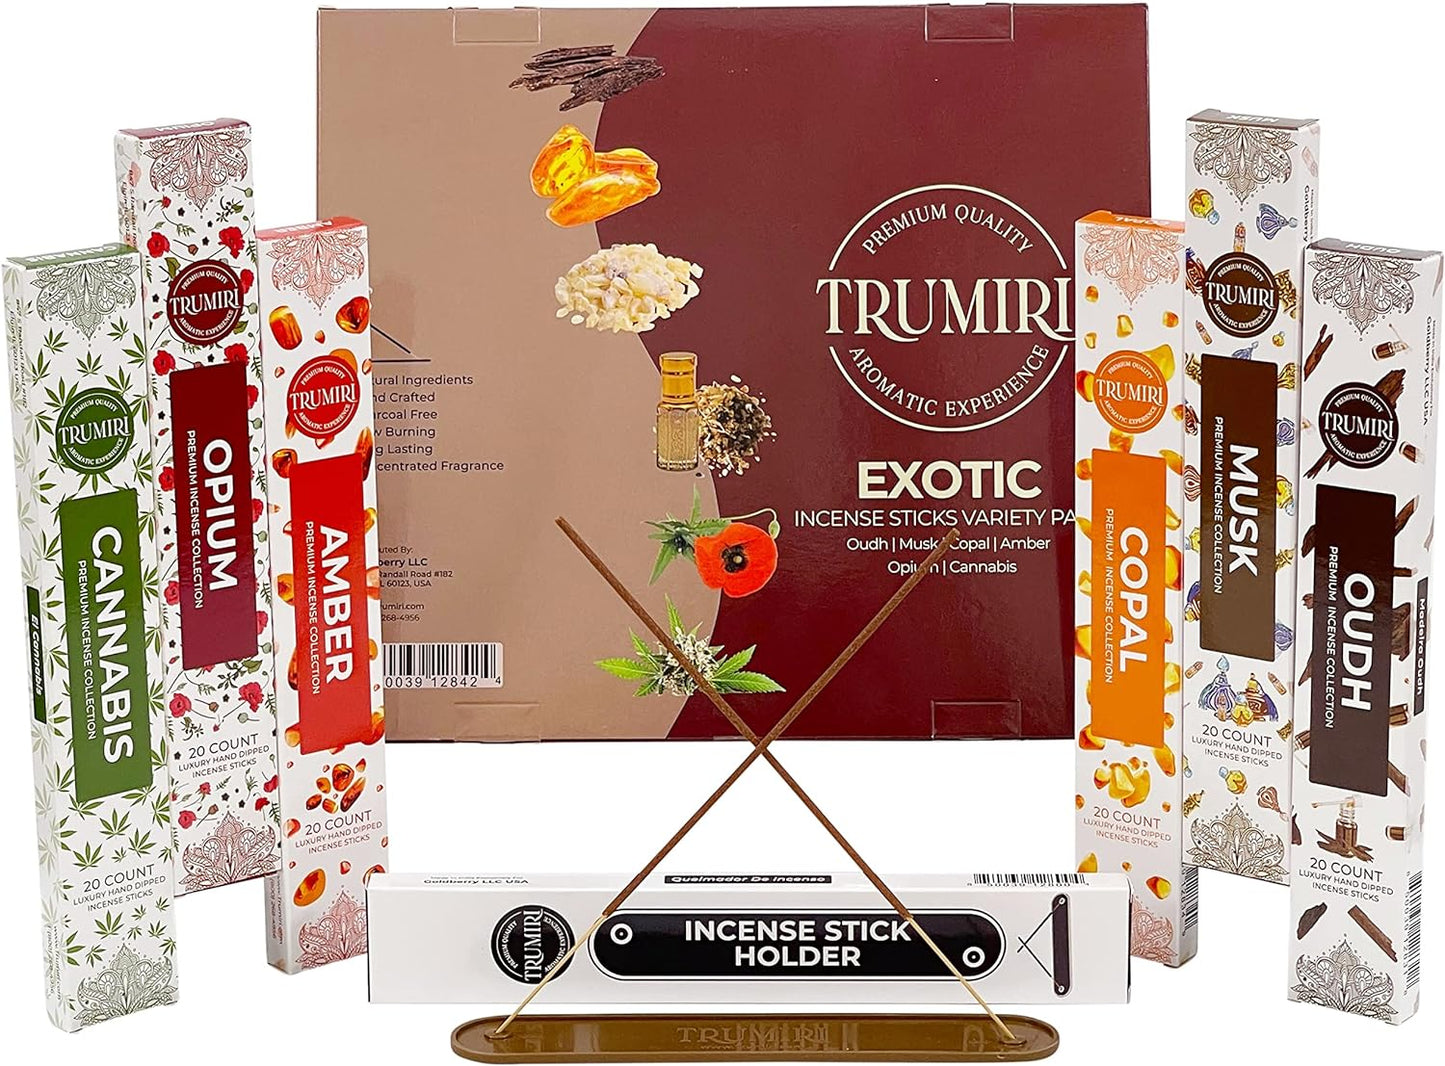 Exotic Incense Sticks Variety Pack with Incense Holder